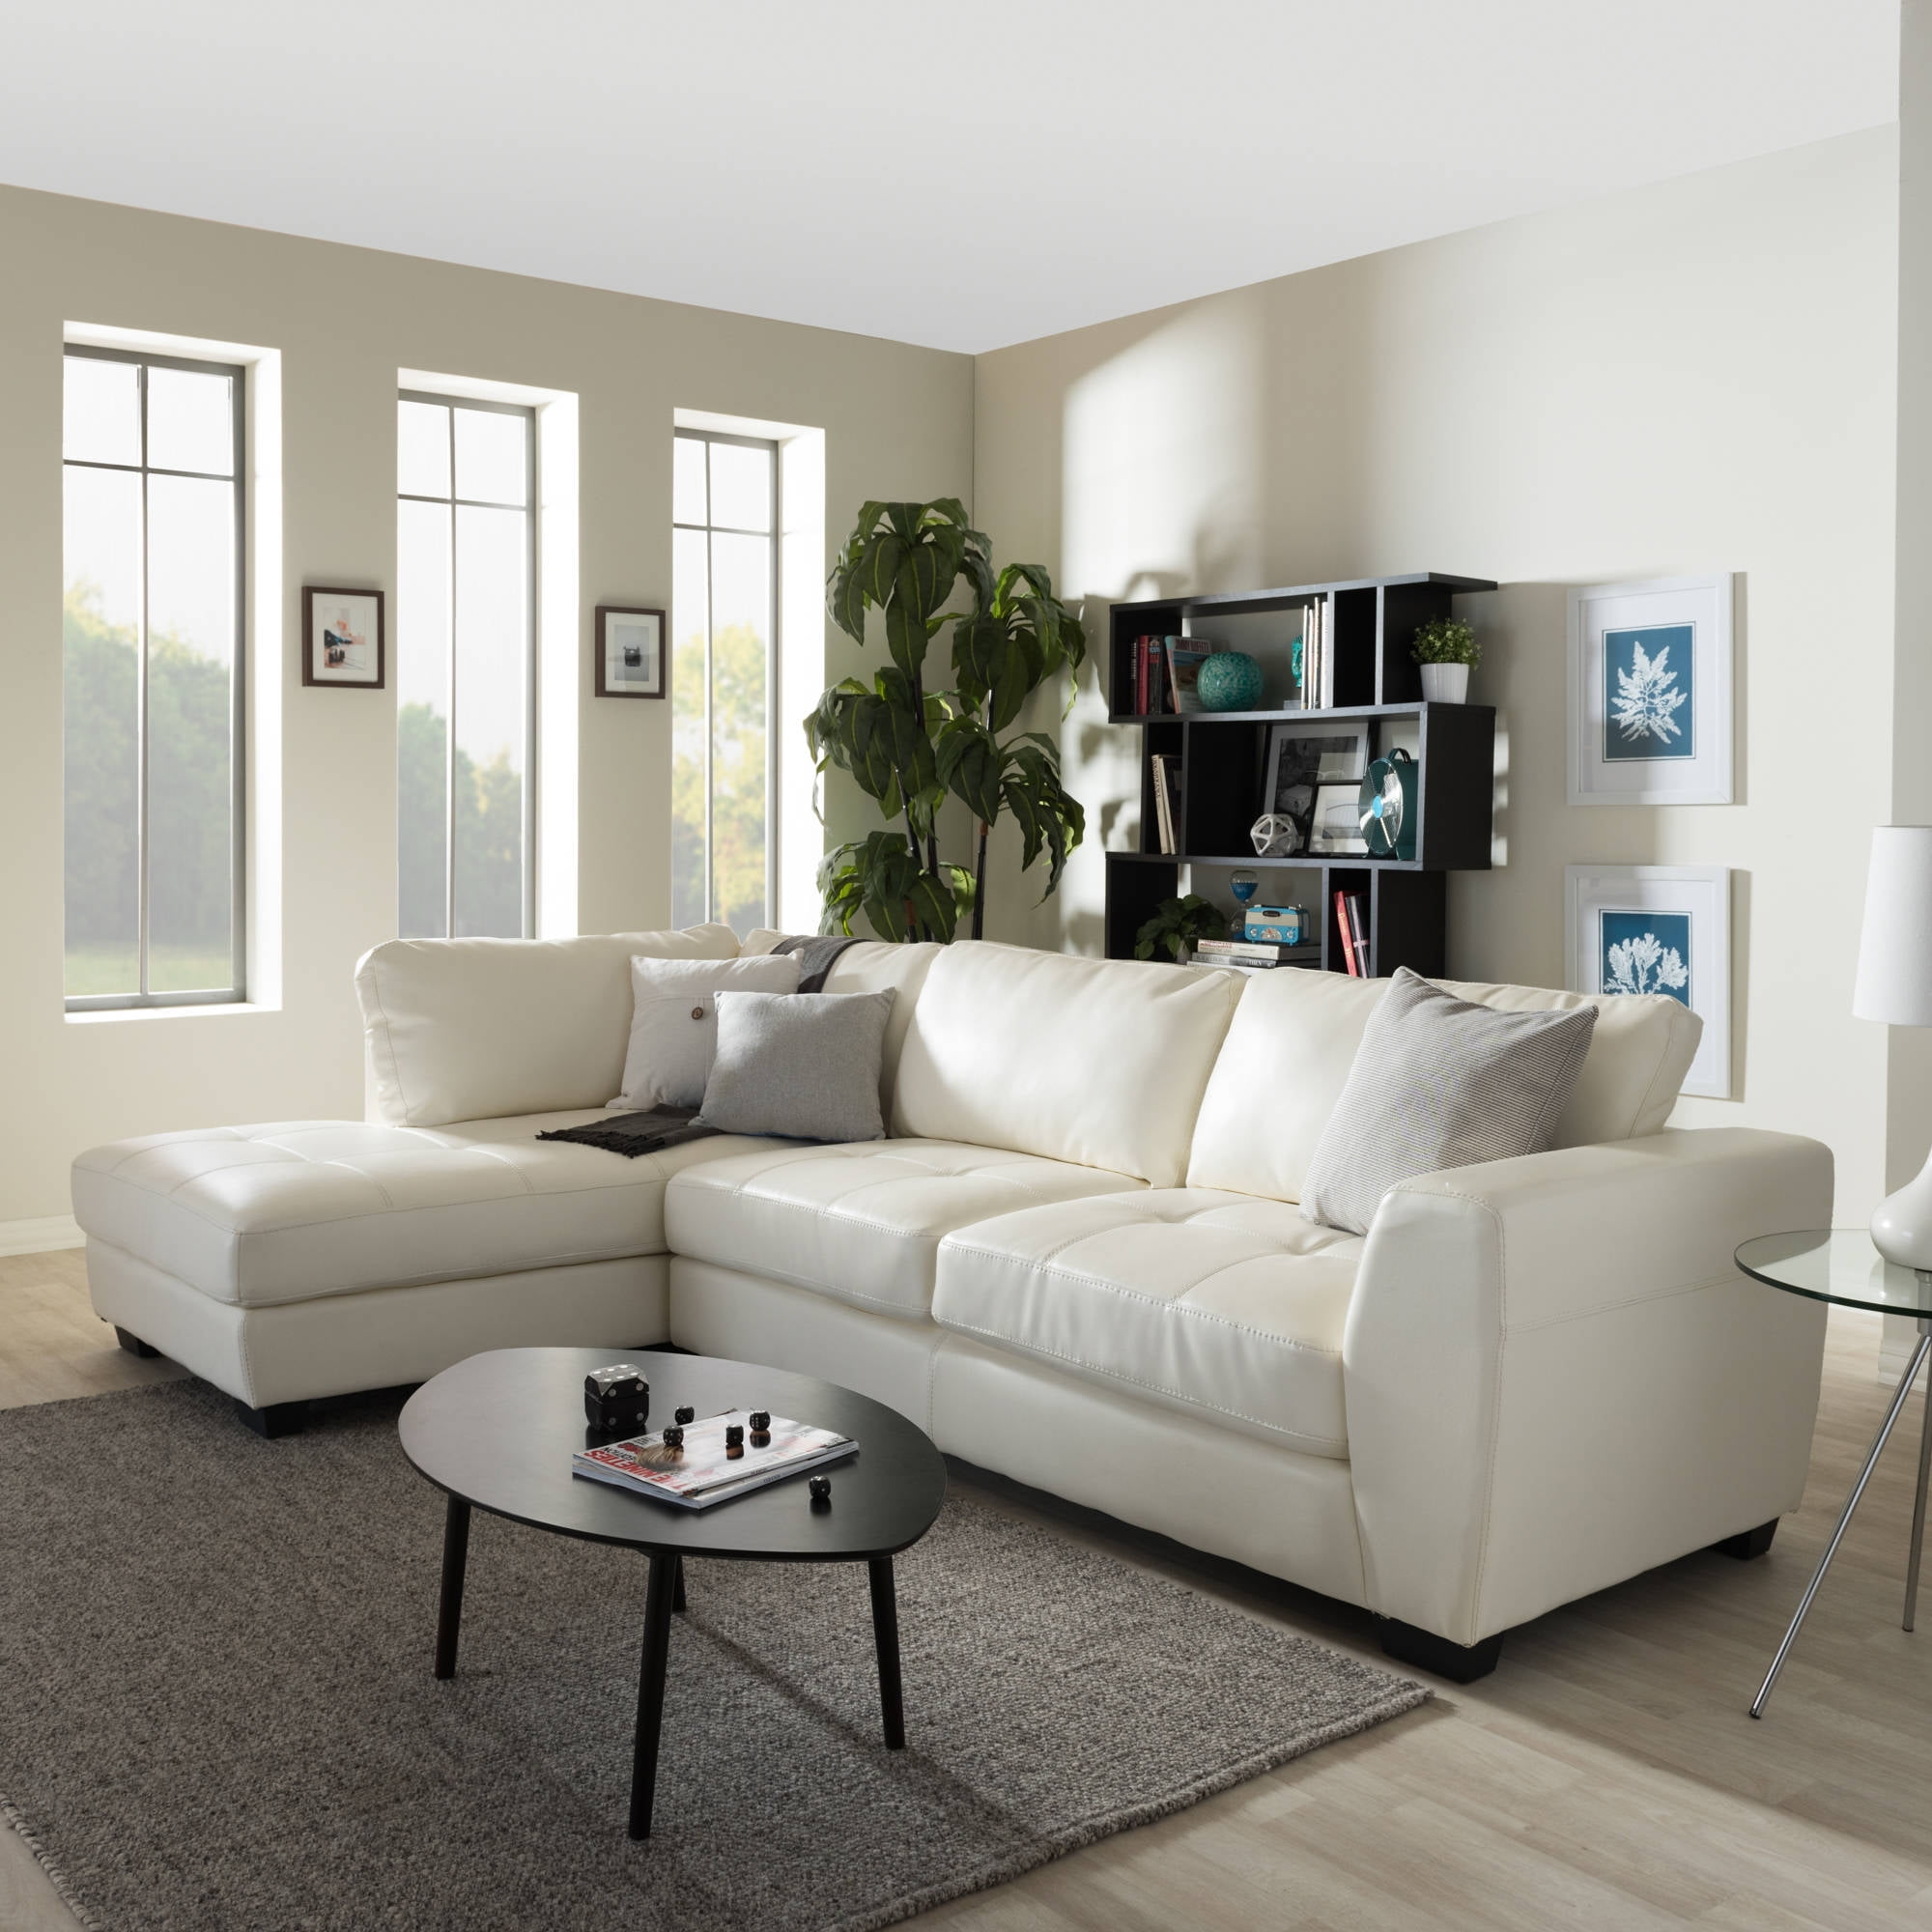 Baxton Studio Orland White Leather, White Leather Contemporary Sectional